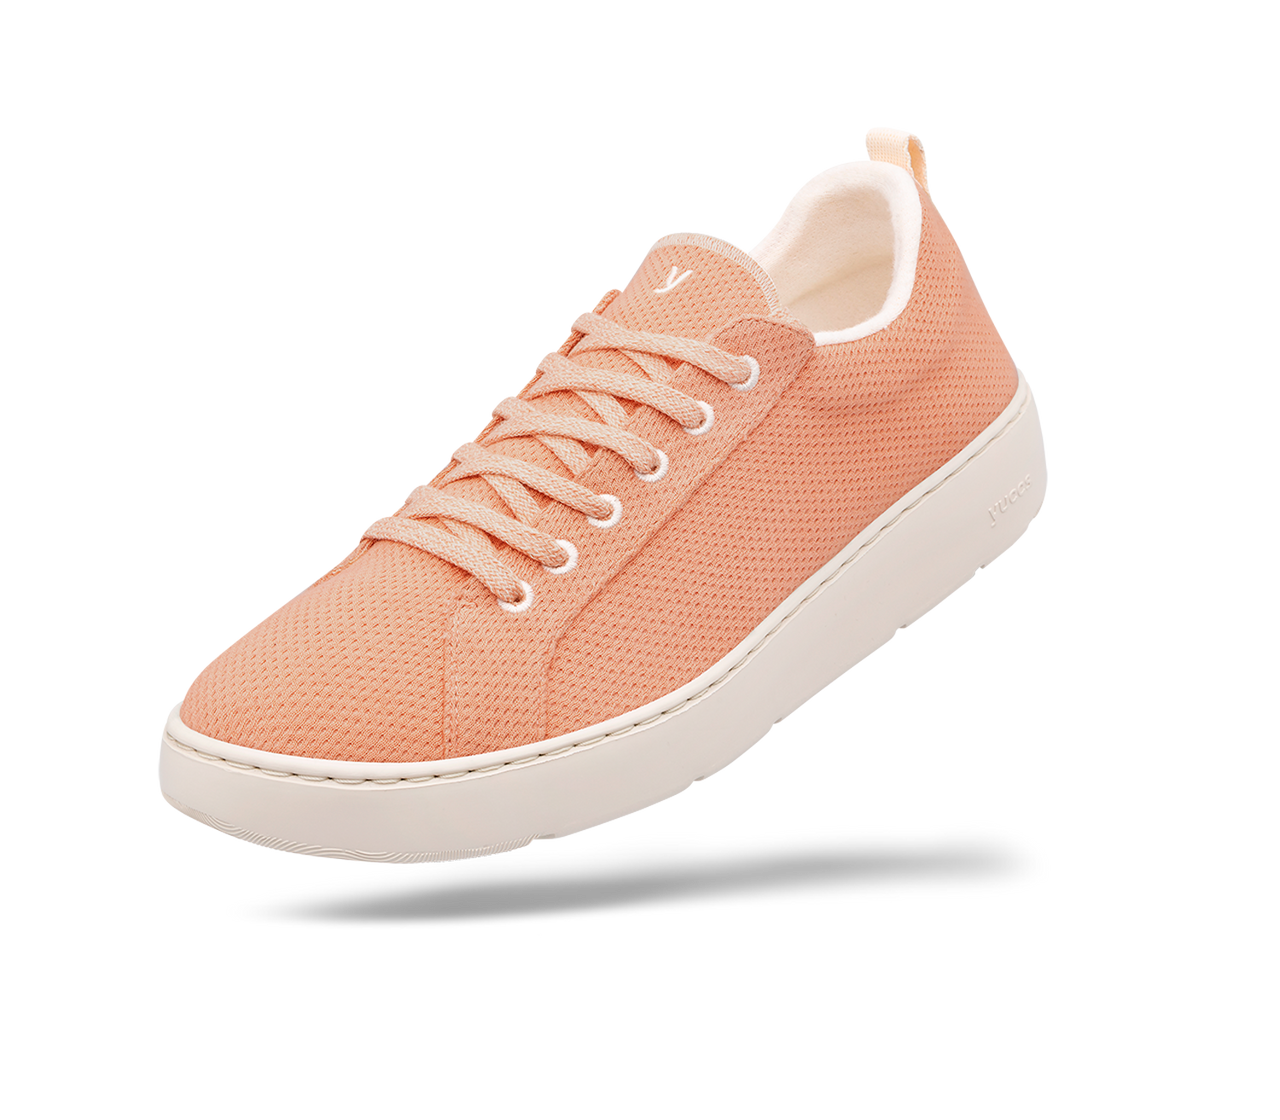 Bamboo Casual Outlet Femmes